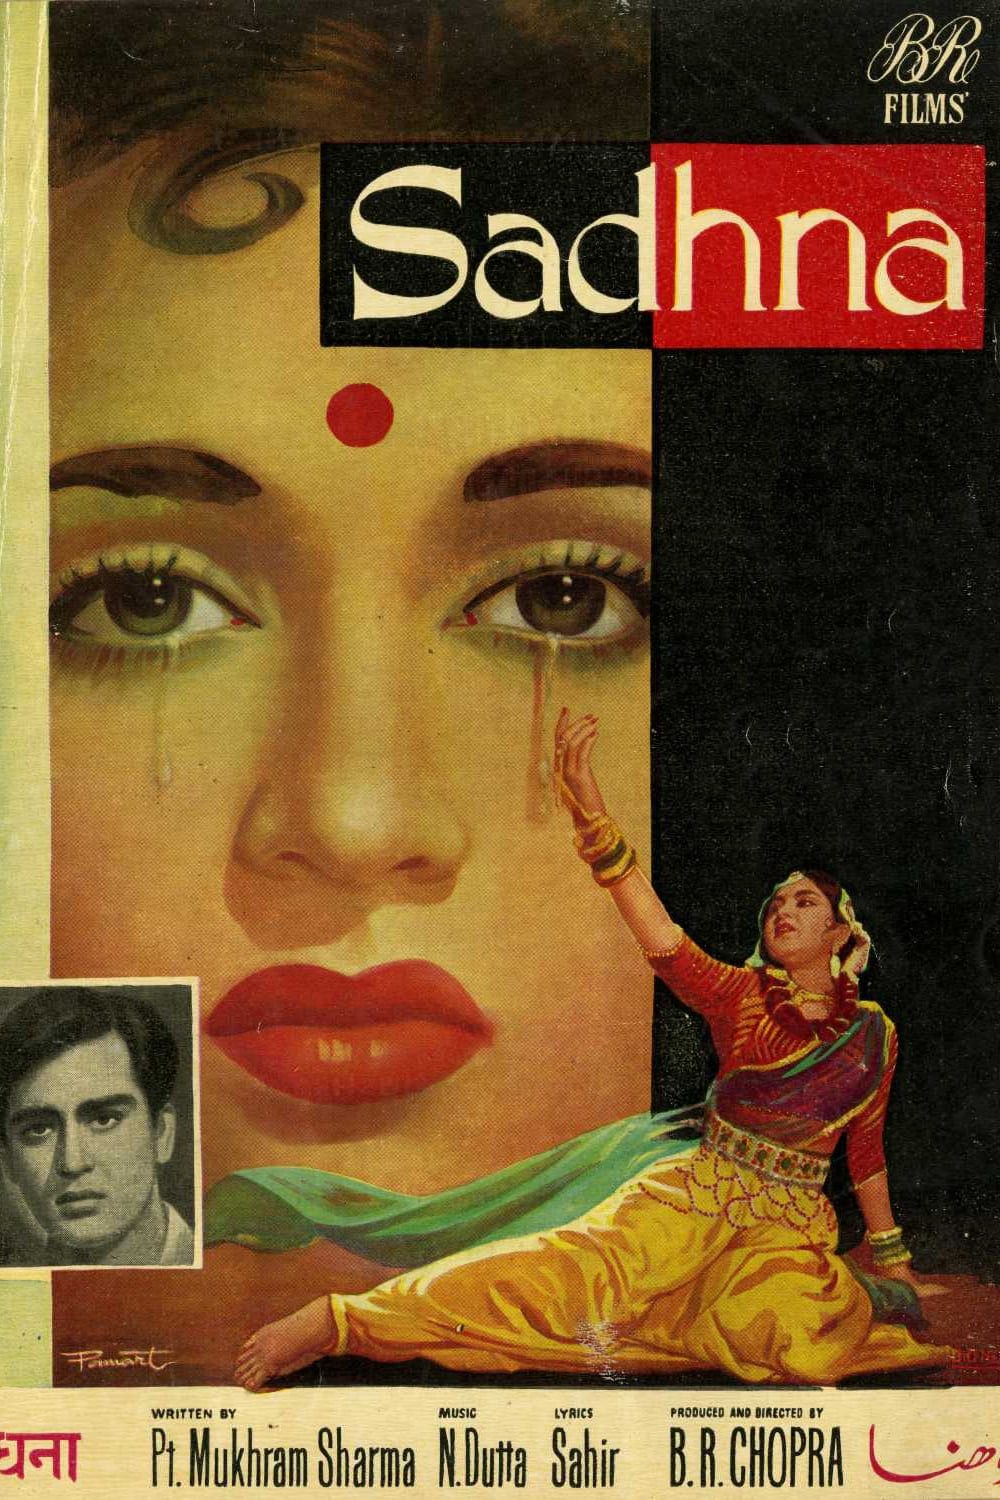 Poster for the movie "Sadhna"